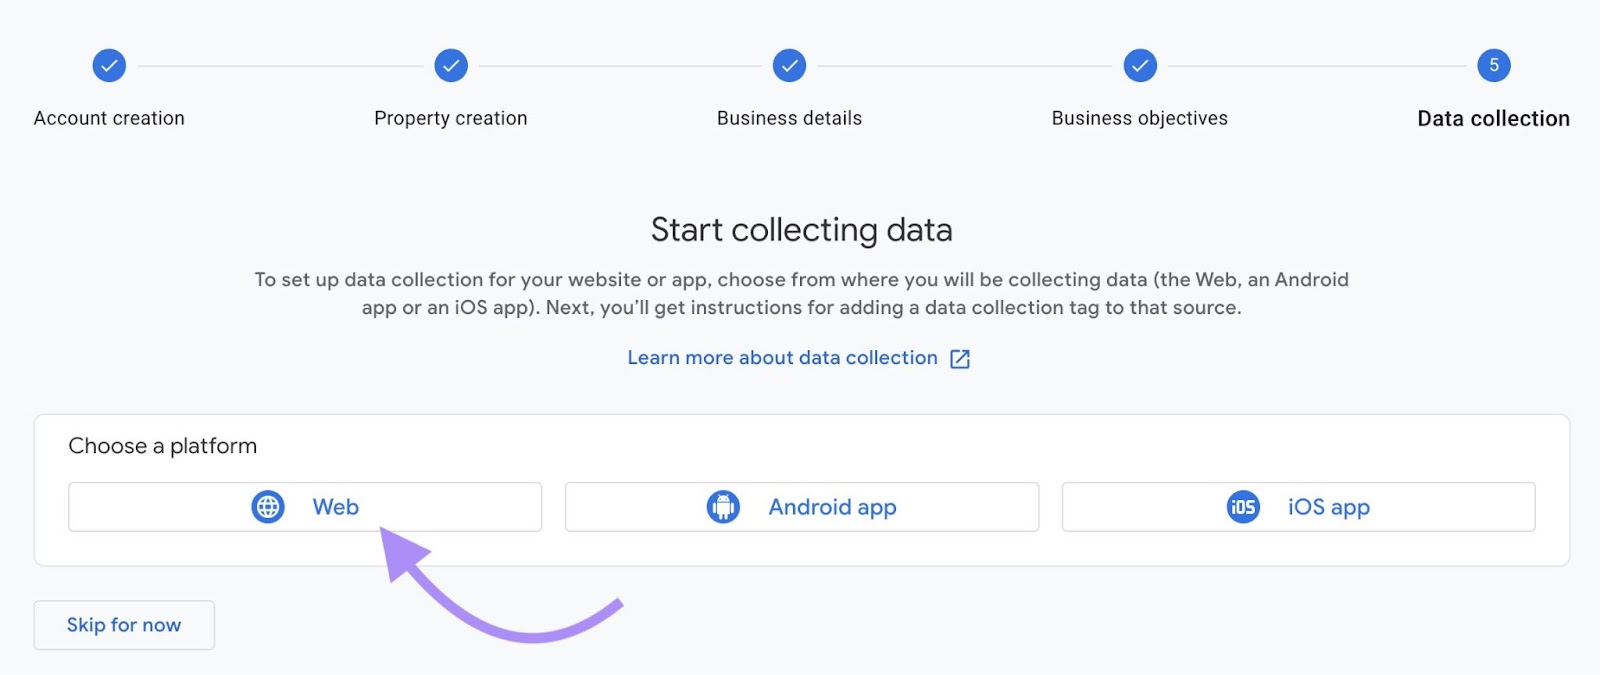 "Web" option selected under "Start collecting data" window